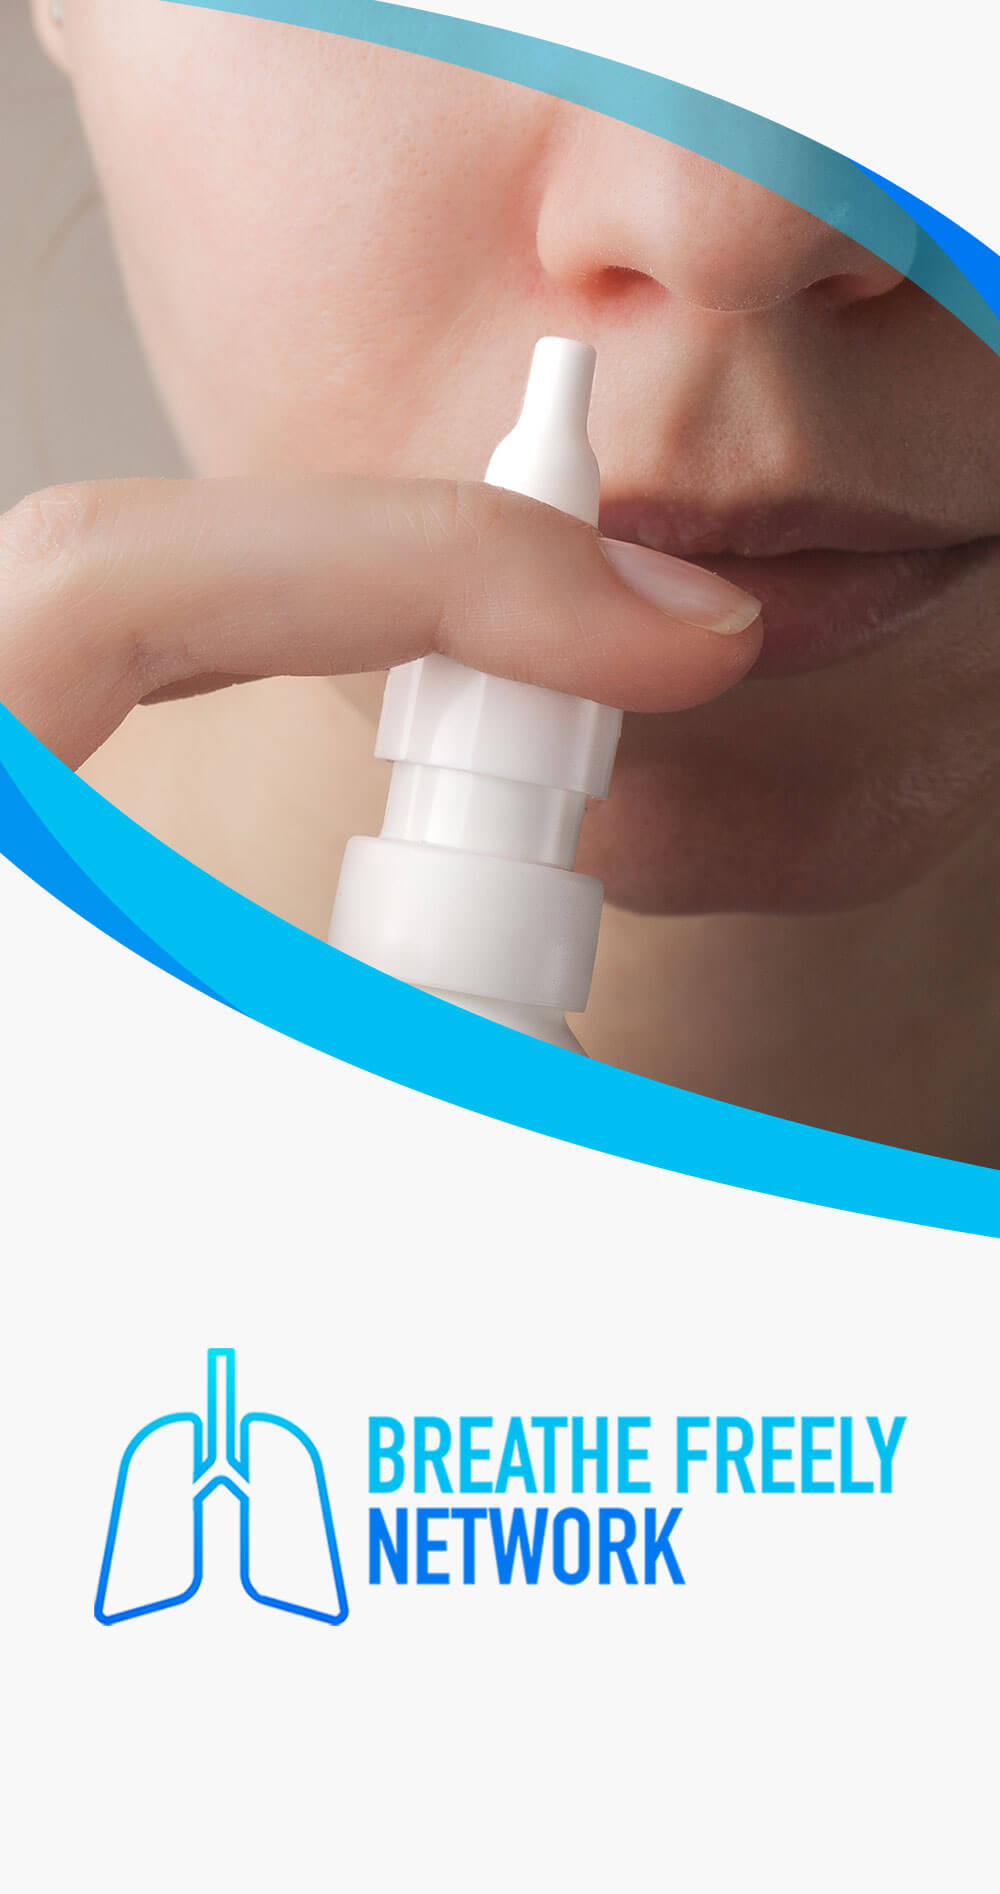 intranasal spray medication and maintenance for respiratory conditions